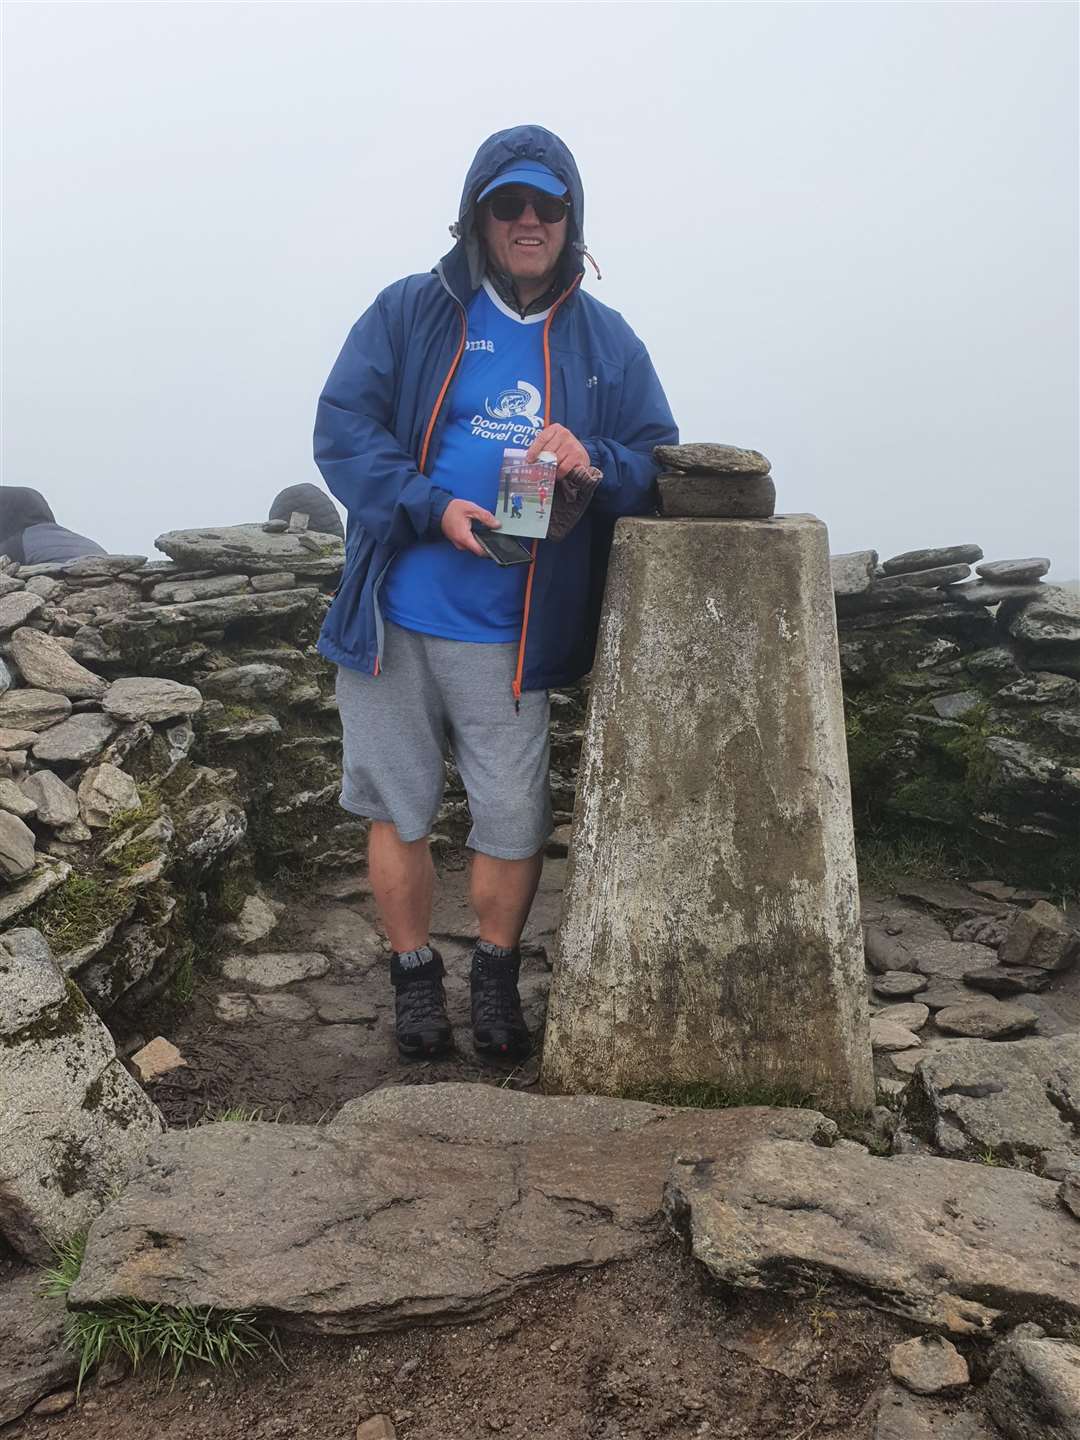 Chris with the photo of his dad and the Queen of the South football shirt at the summit trig point.